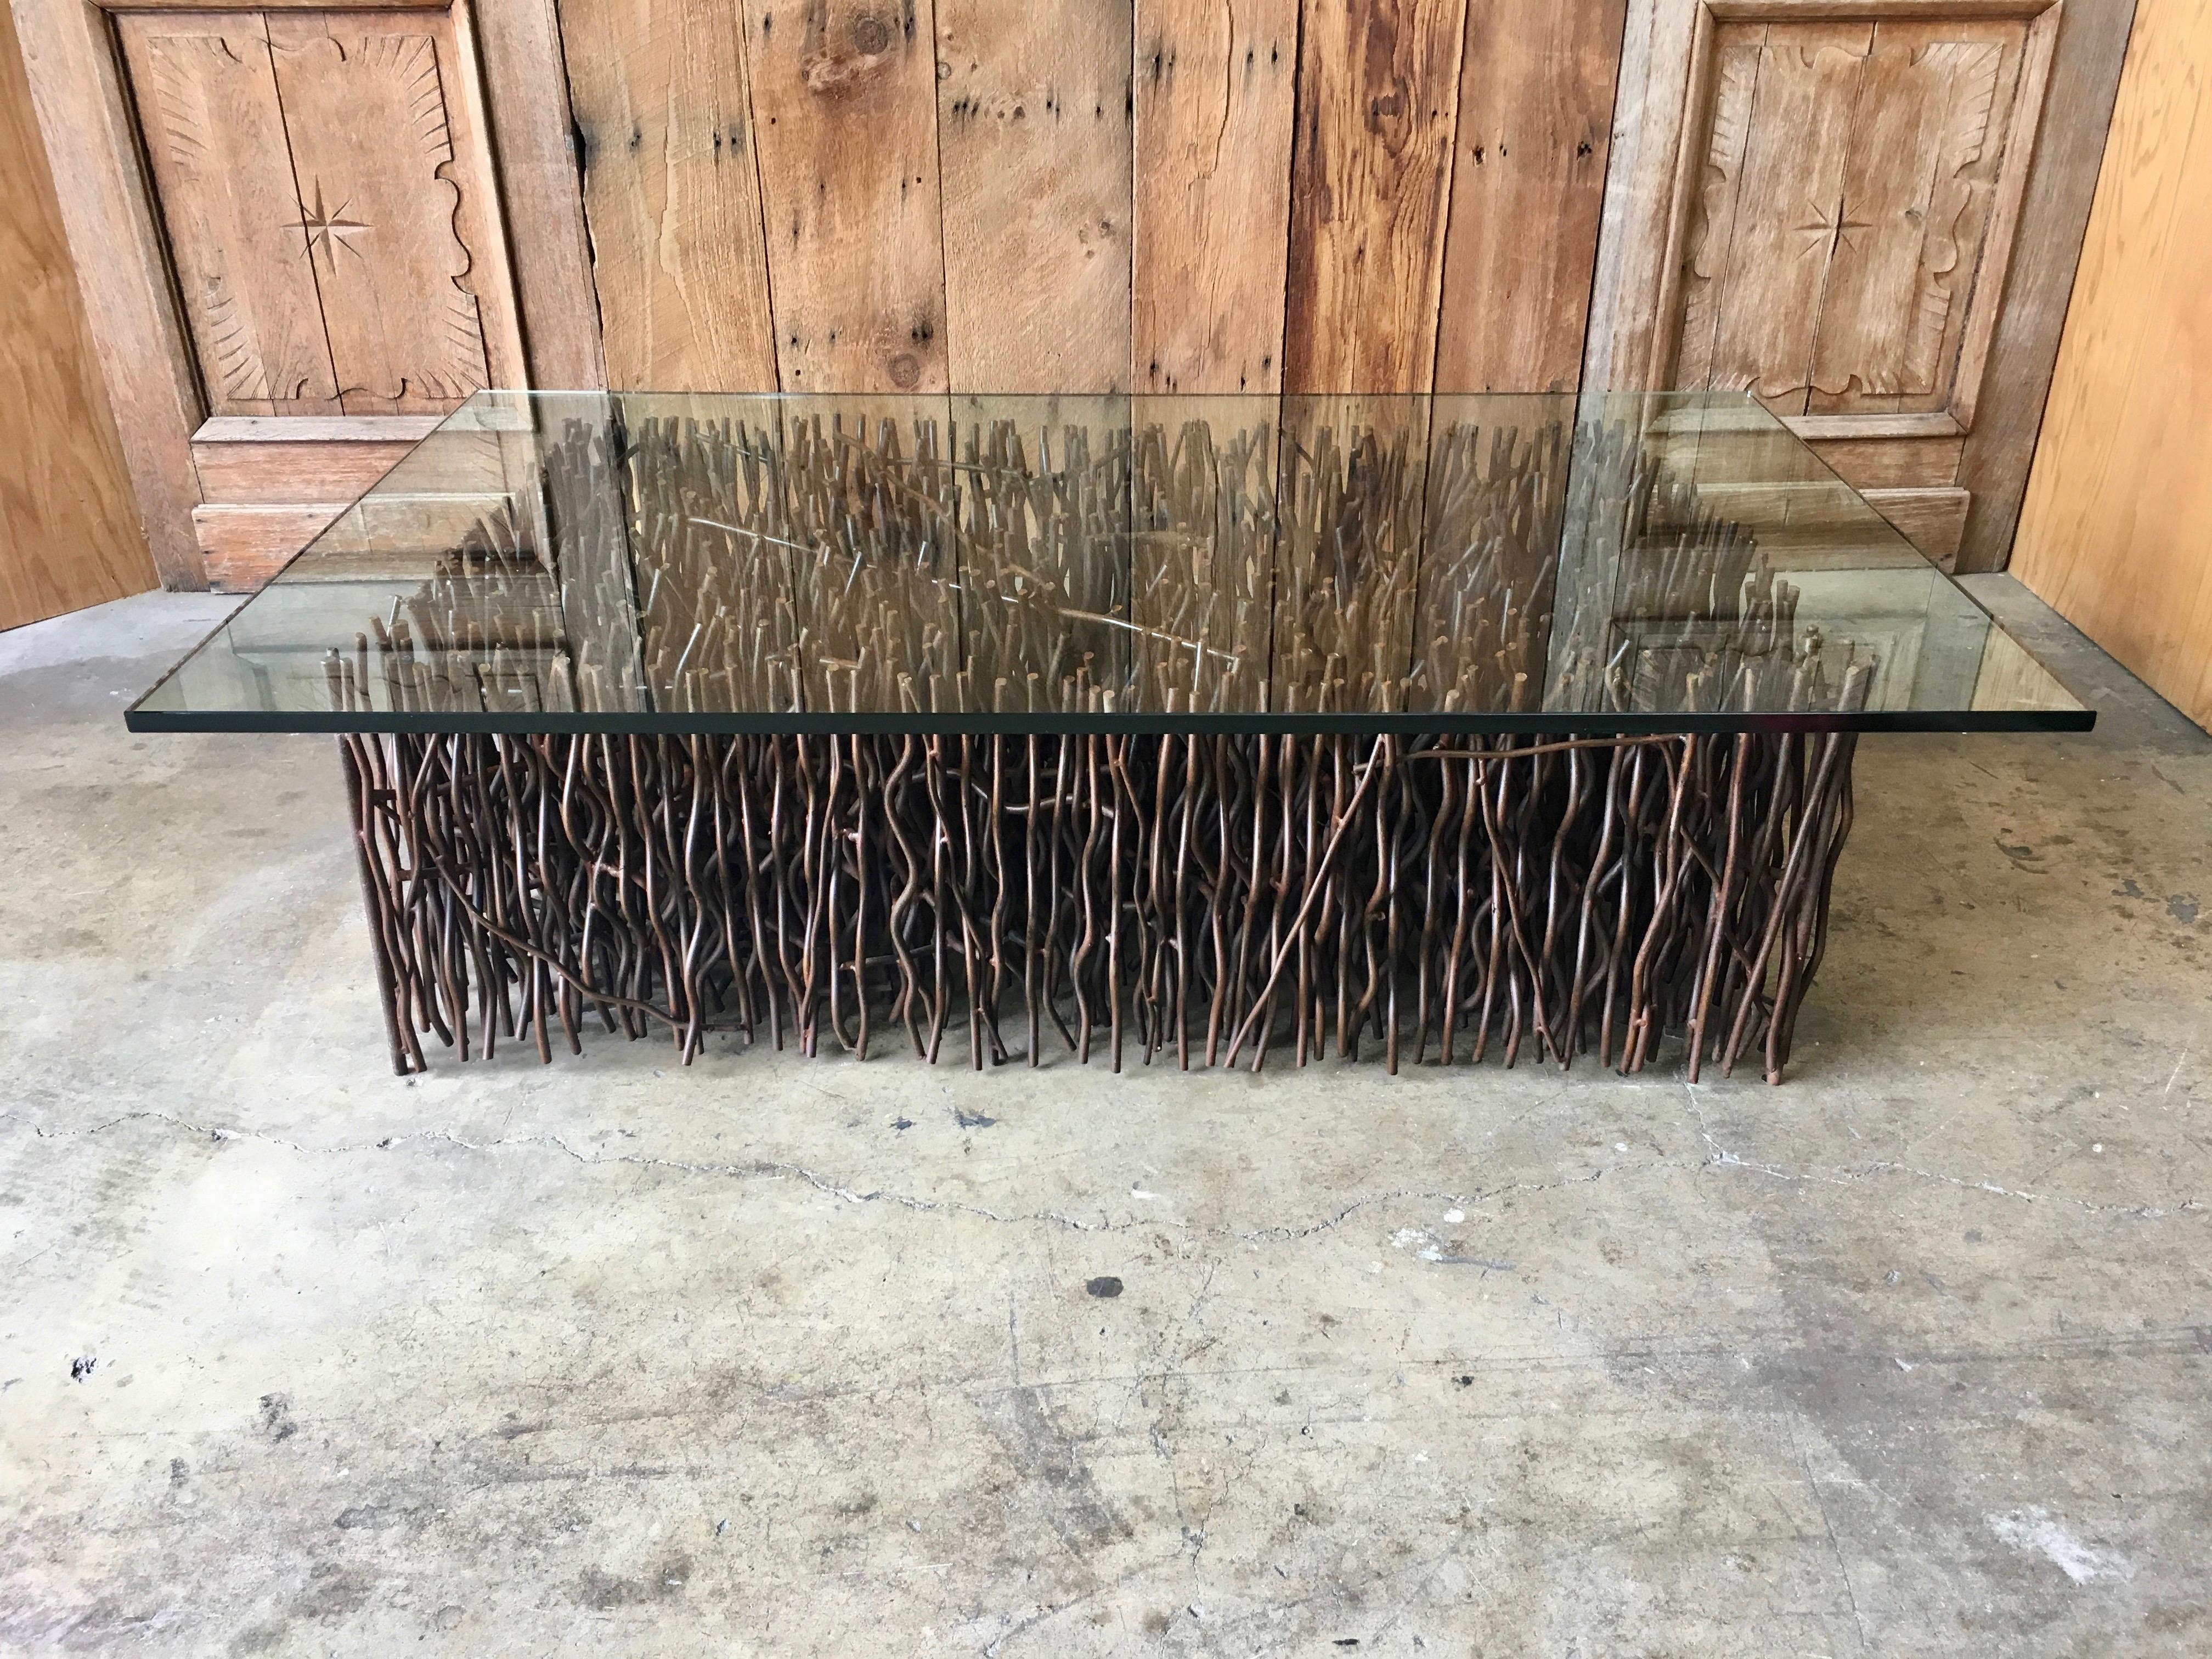 Custom Brutalist steel rods sculpted into a massive intertwining brutal base with a 3/4